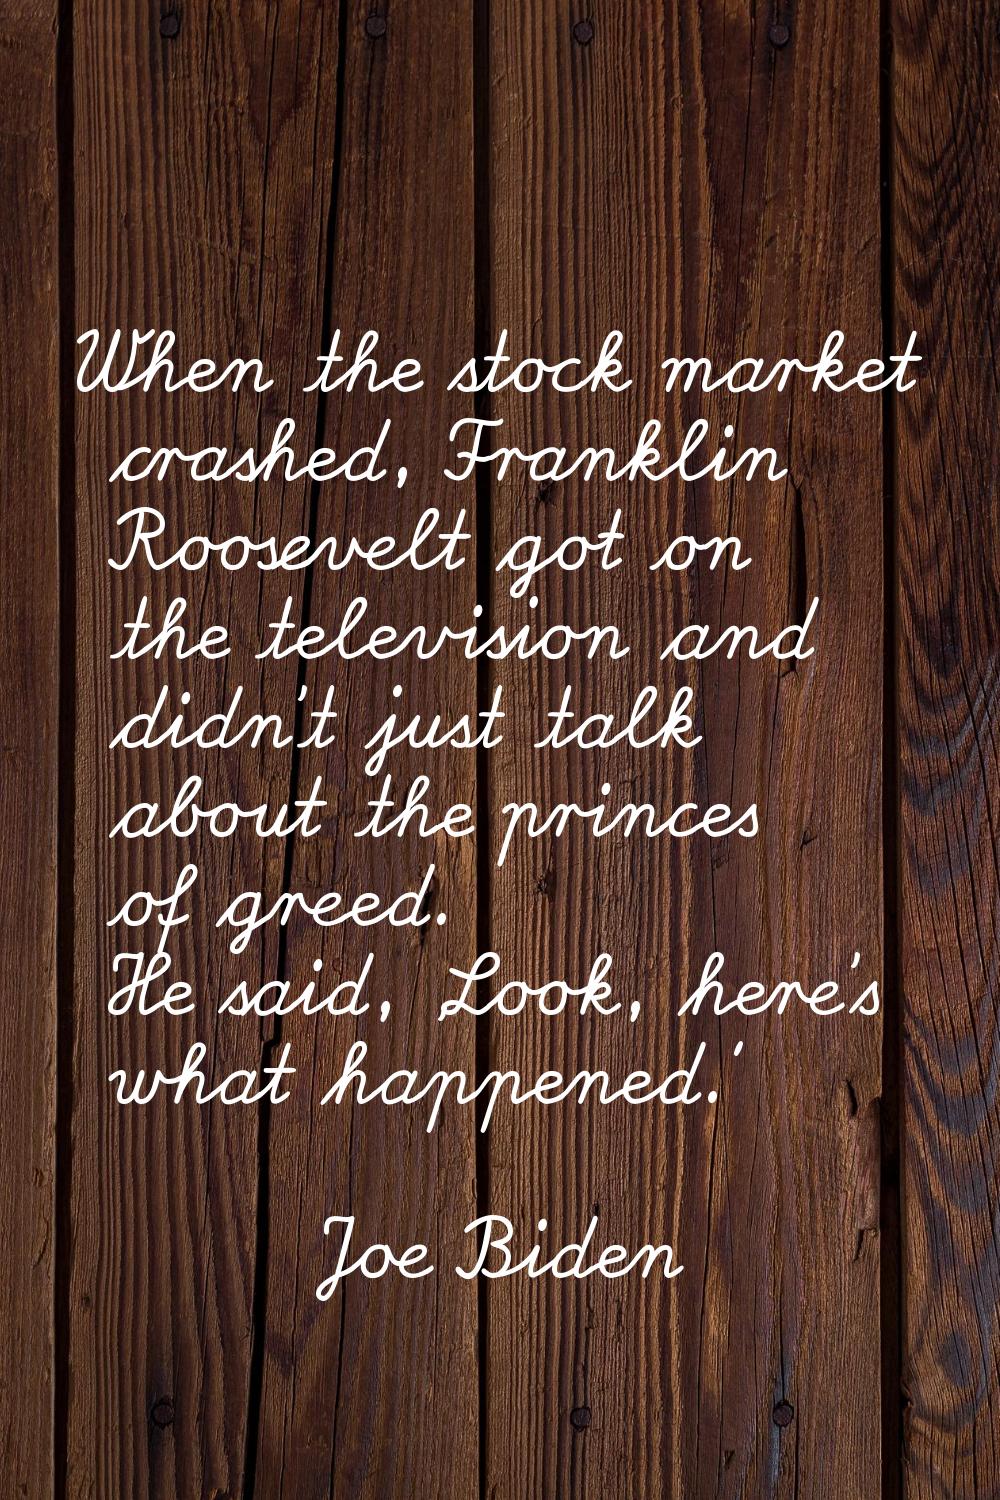 When the stock market crashed, Franklin Roosevelt got on the television and didn't just talk about 